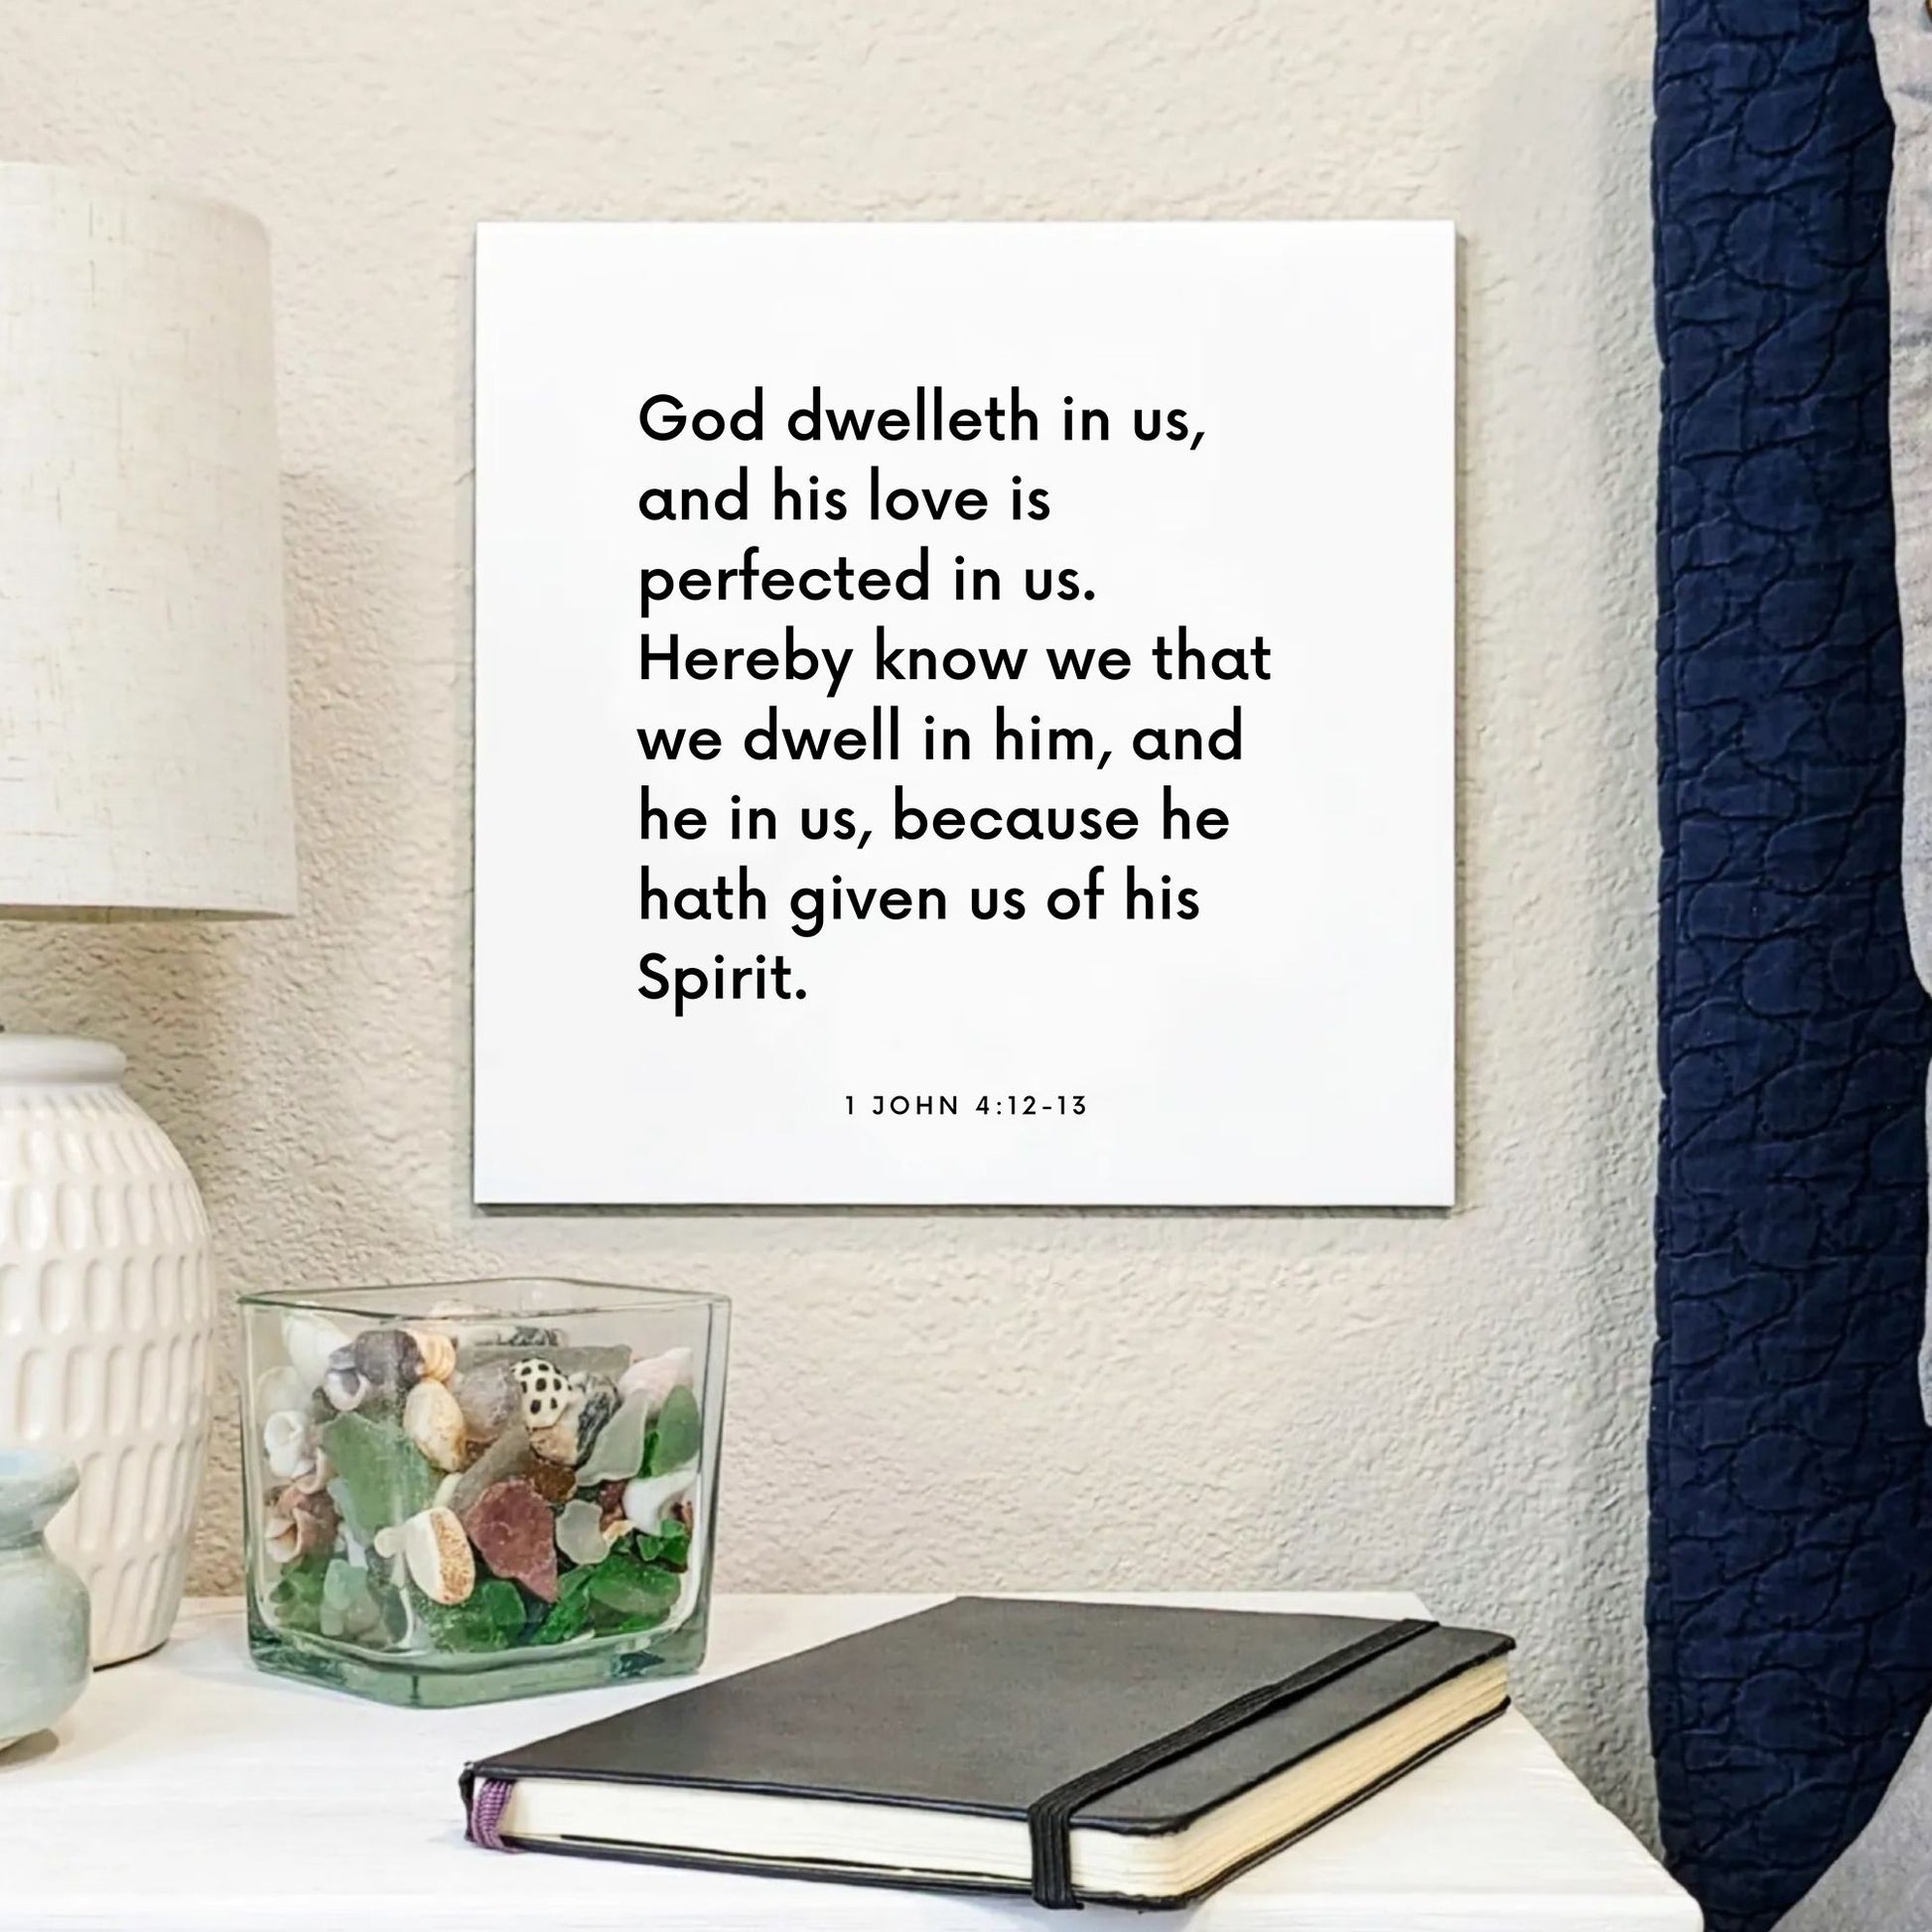 Bedside mouting of the scripture tile for 1 John 4:12-13 - "Hereby know we that we dwell in him"